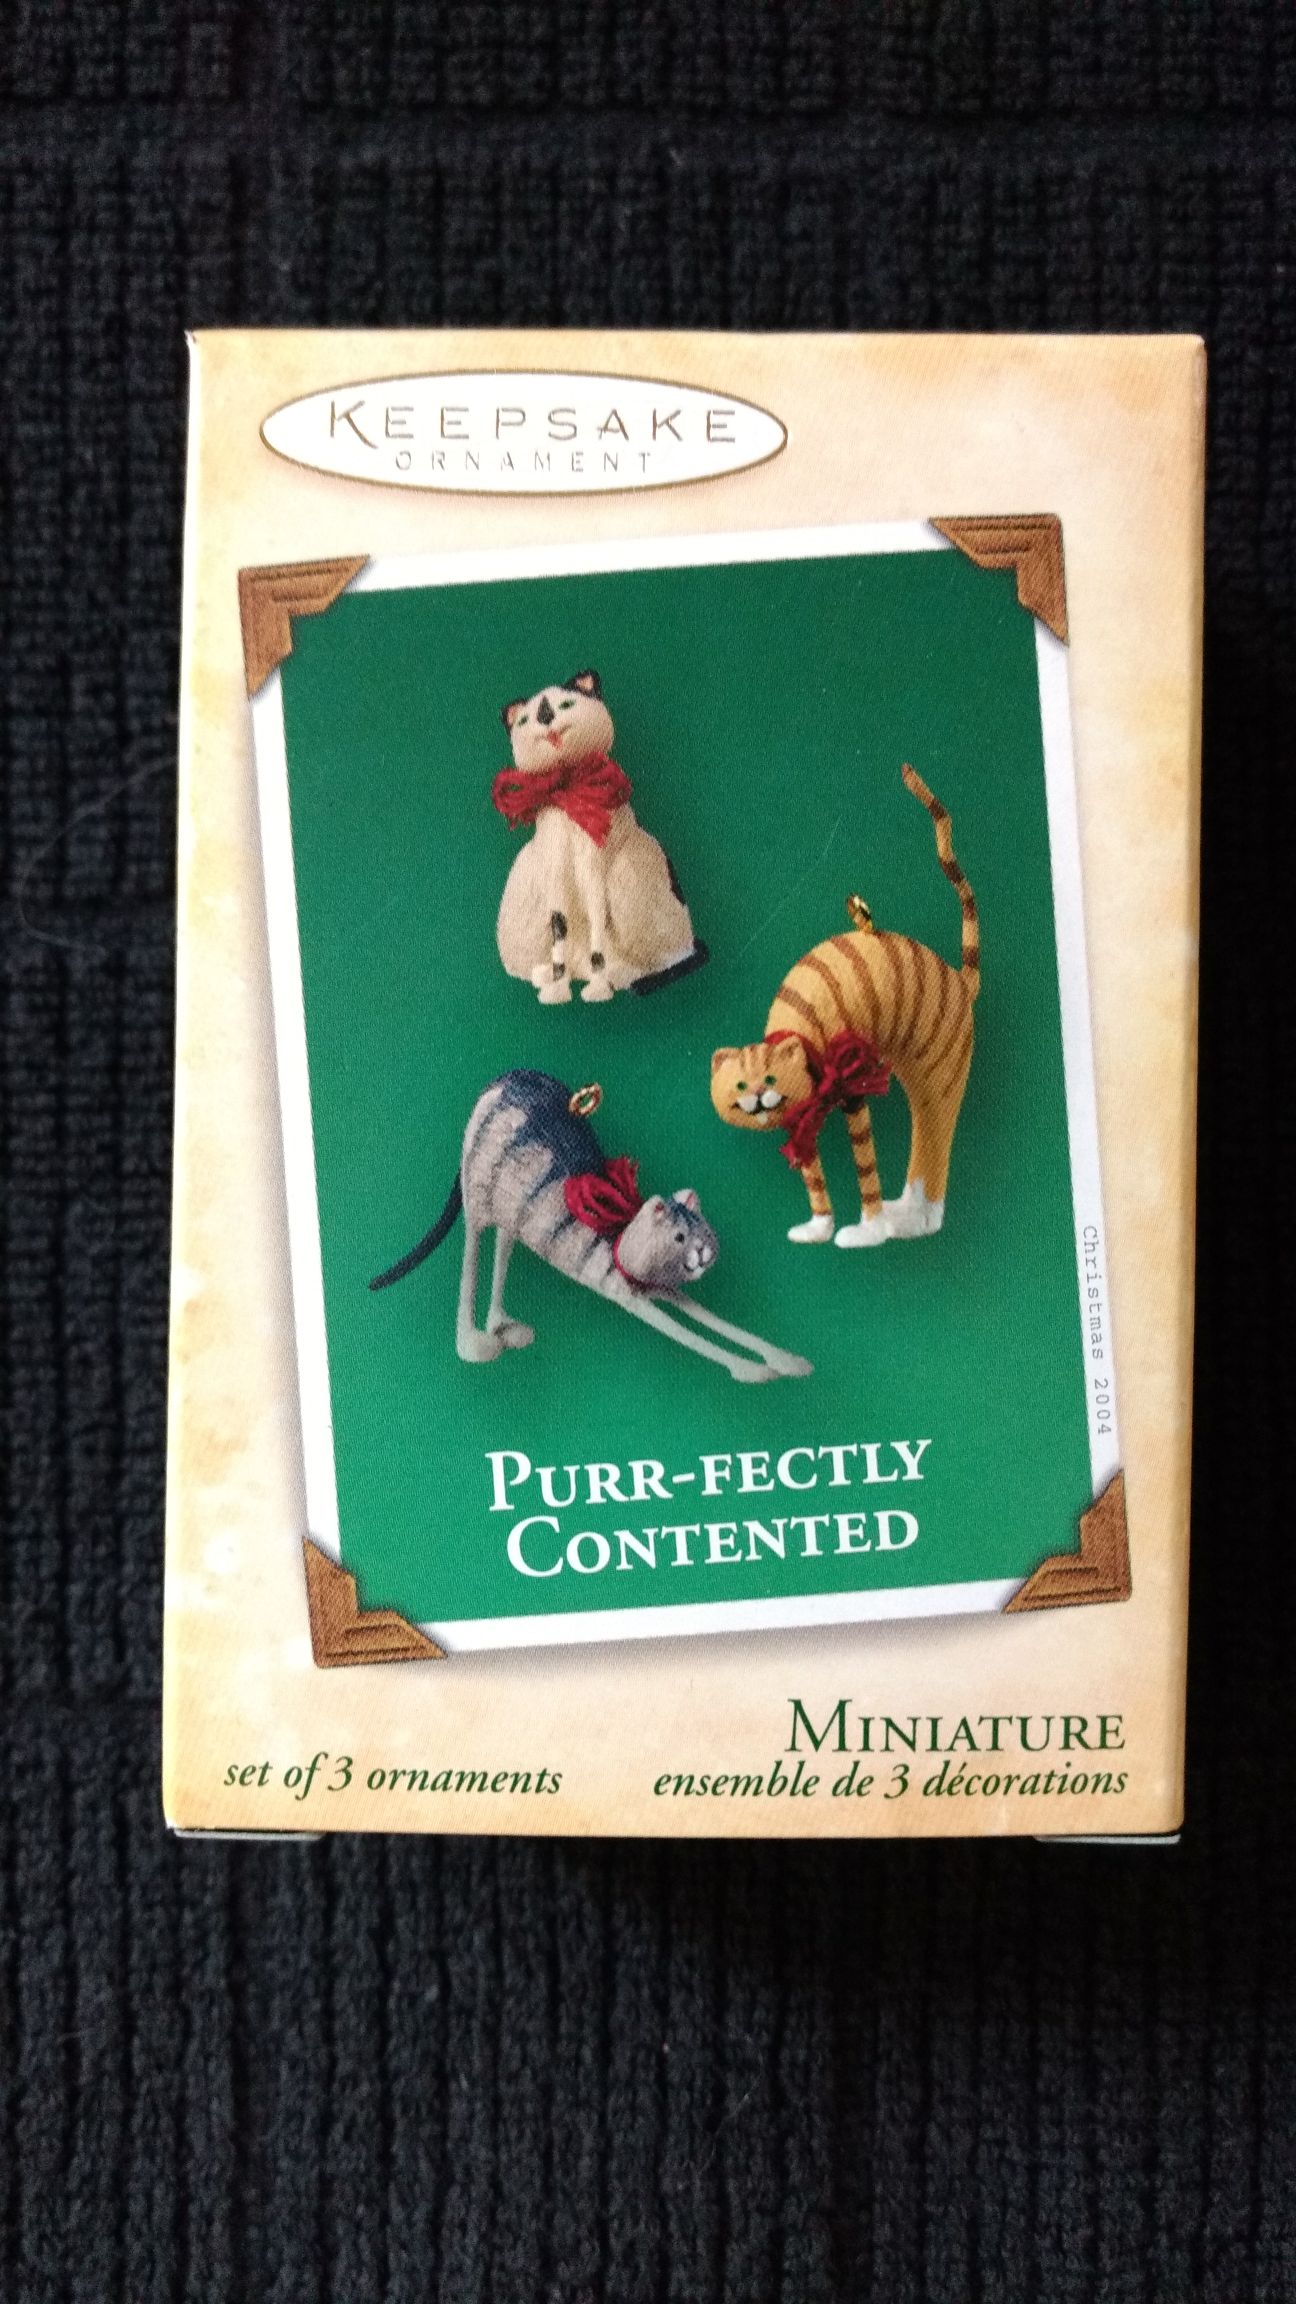 Purr-fectly Contented - Keepsake Miniature (Pet) ornament collectible [Barcode 5073017782073] - Main Image 1